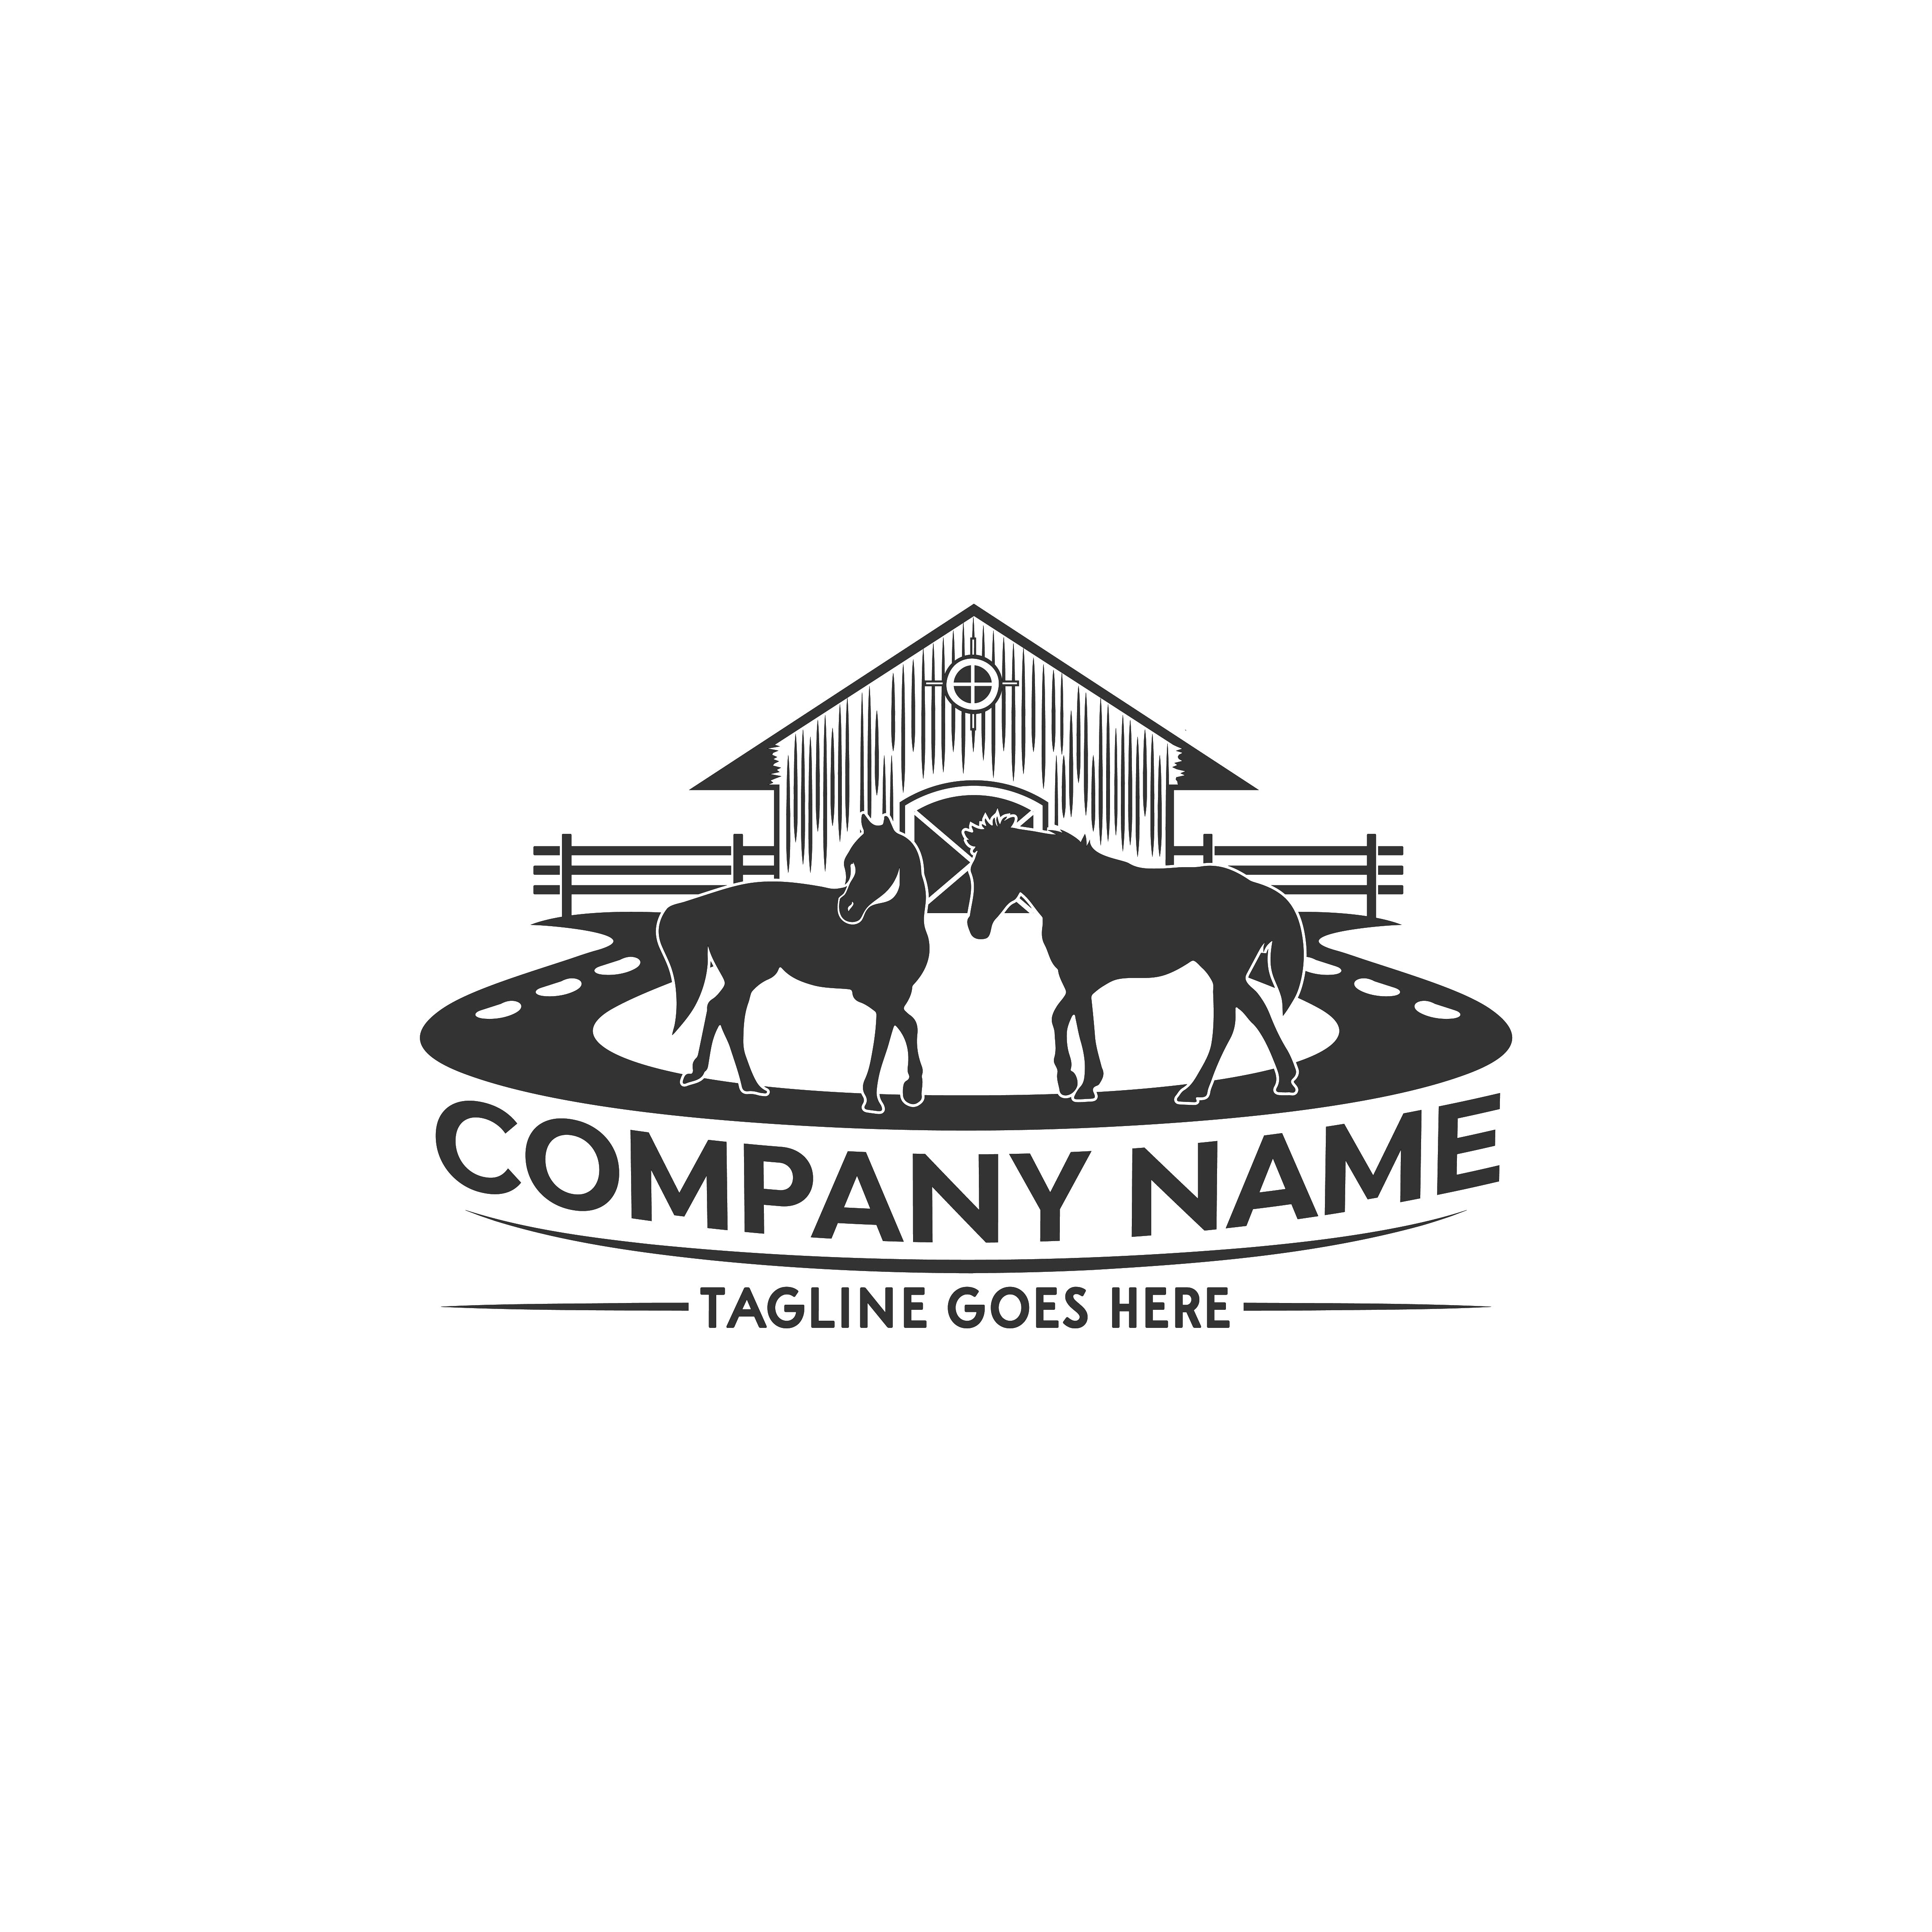 Horse Farm logo for horse Related business purpose cover image.